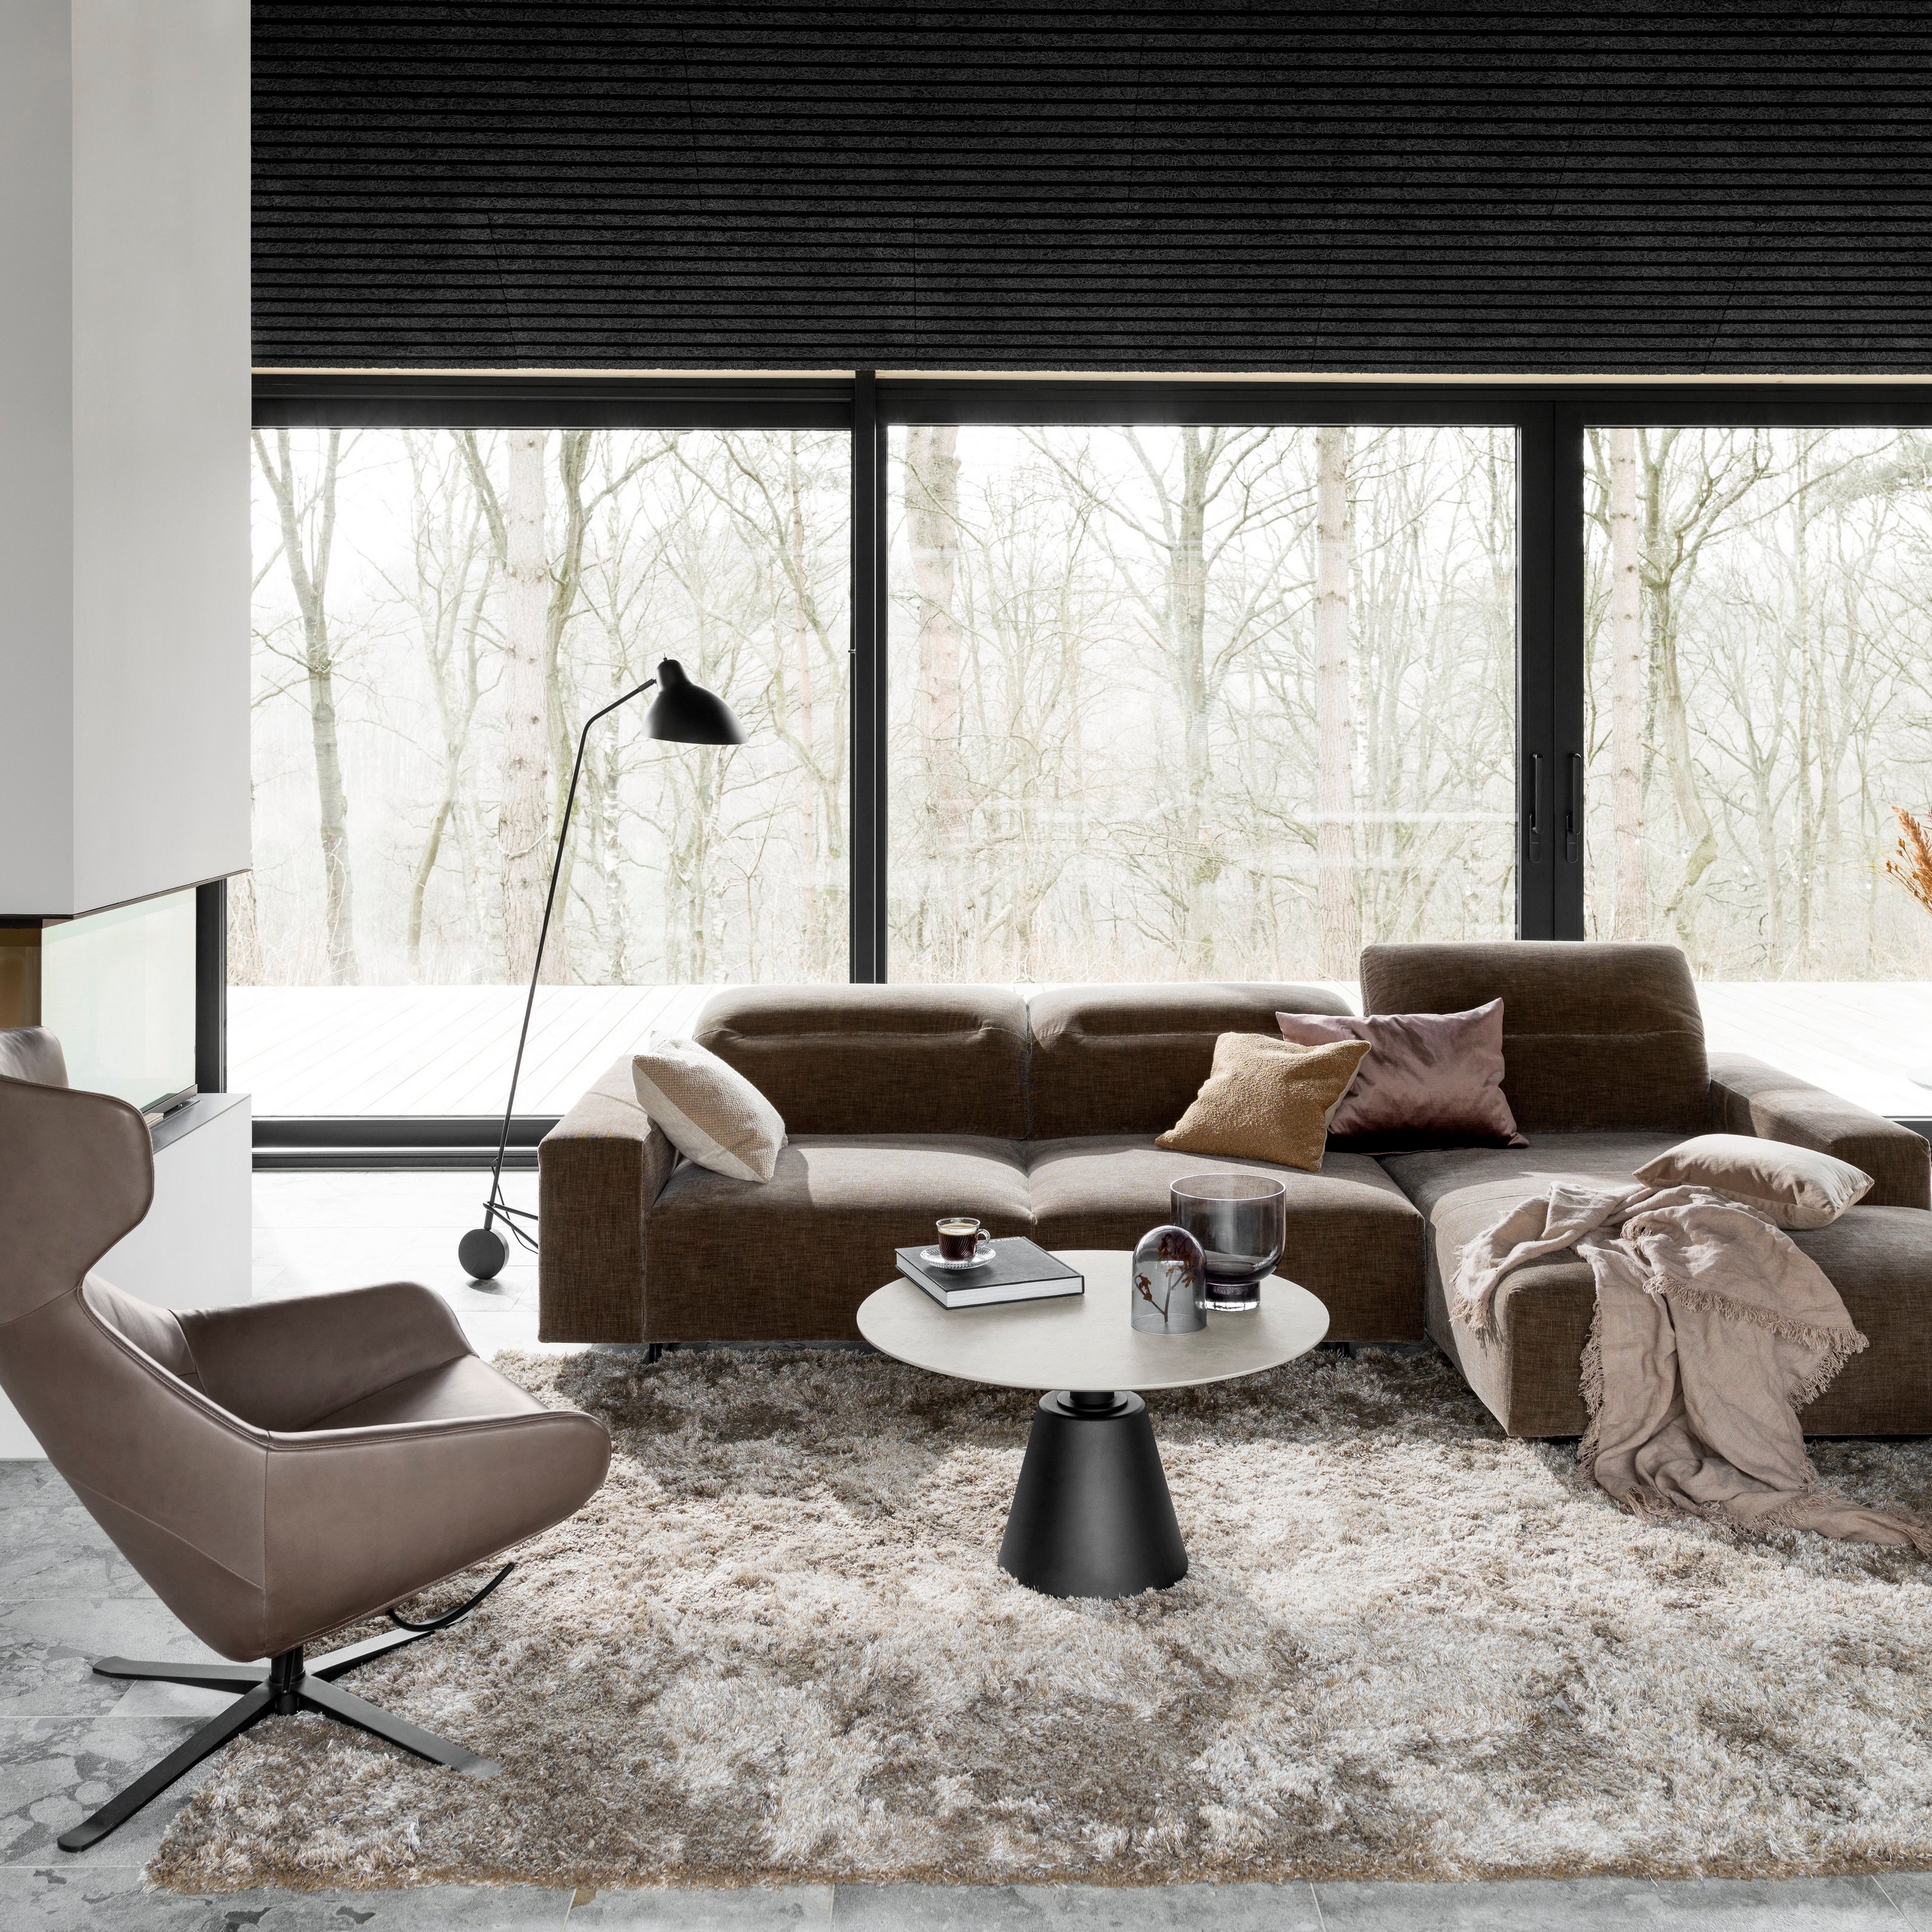 Modern living room with brown sectional sofa, gray rug, and black floor lamp by window.